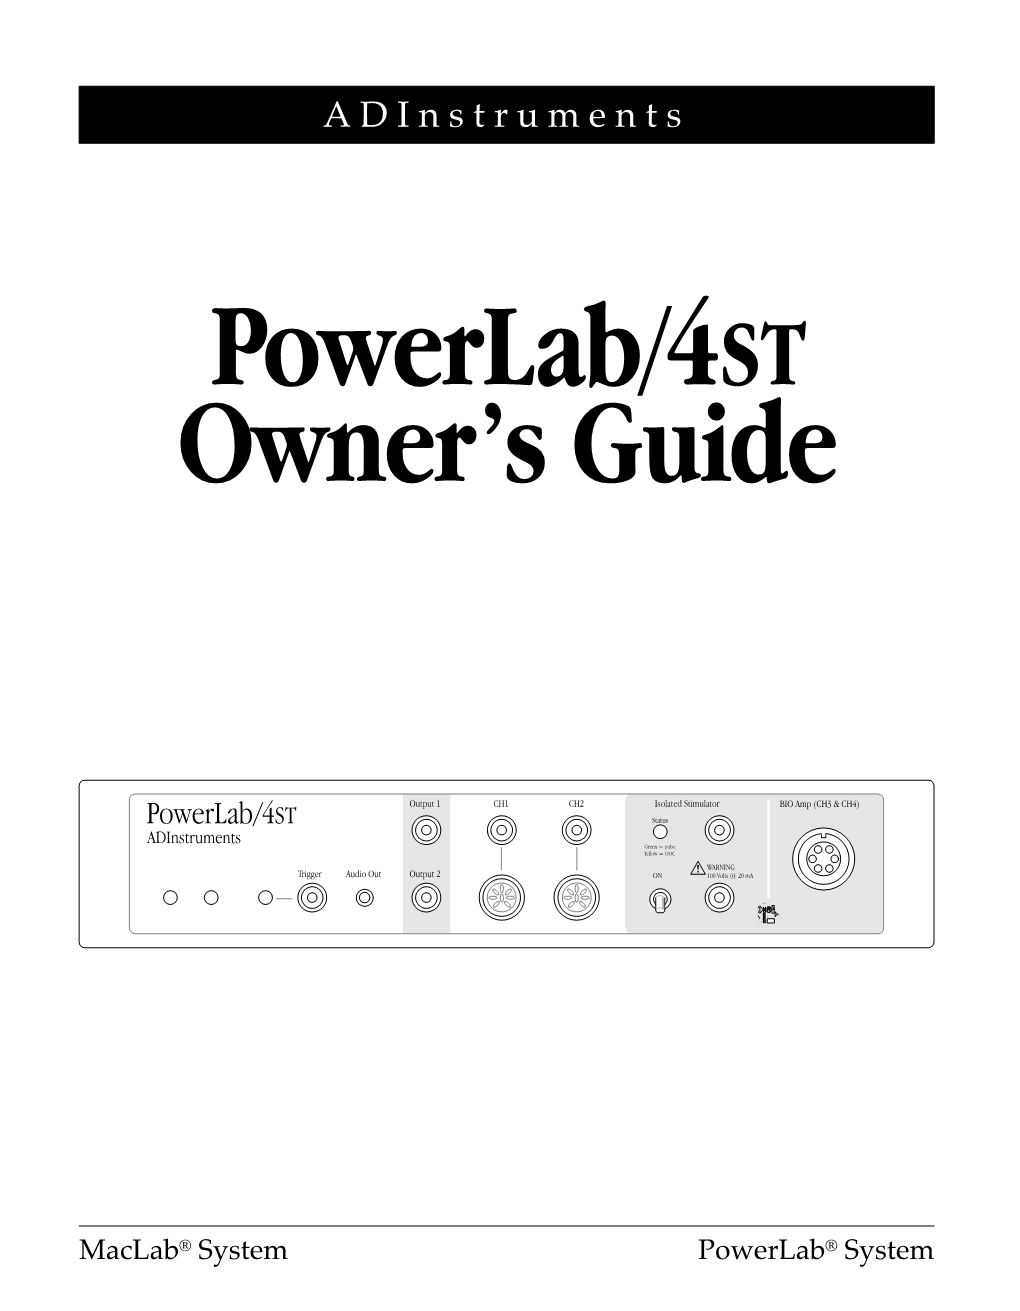 Powerlab/4ST Owner's Guide